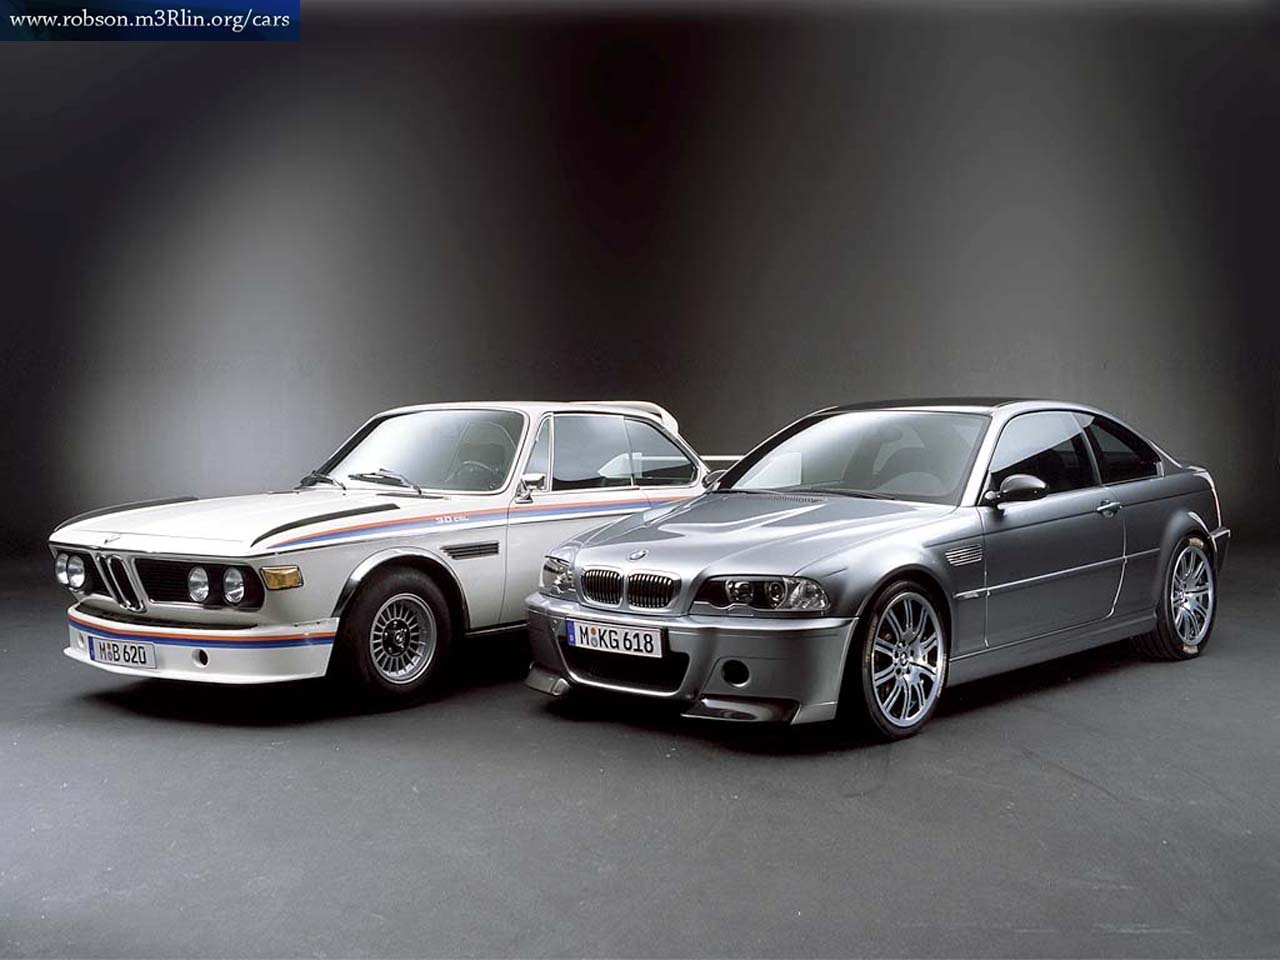 2002-bmw-m3-csl-concept_3-copy.jpg. The M3 GT Coupe was a limited-edition